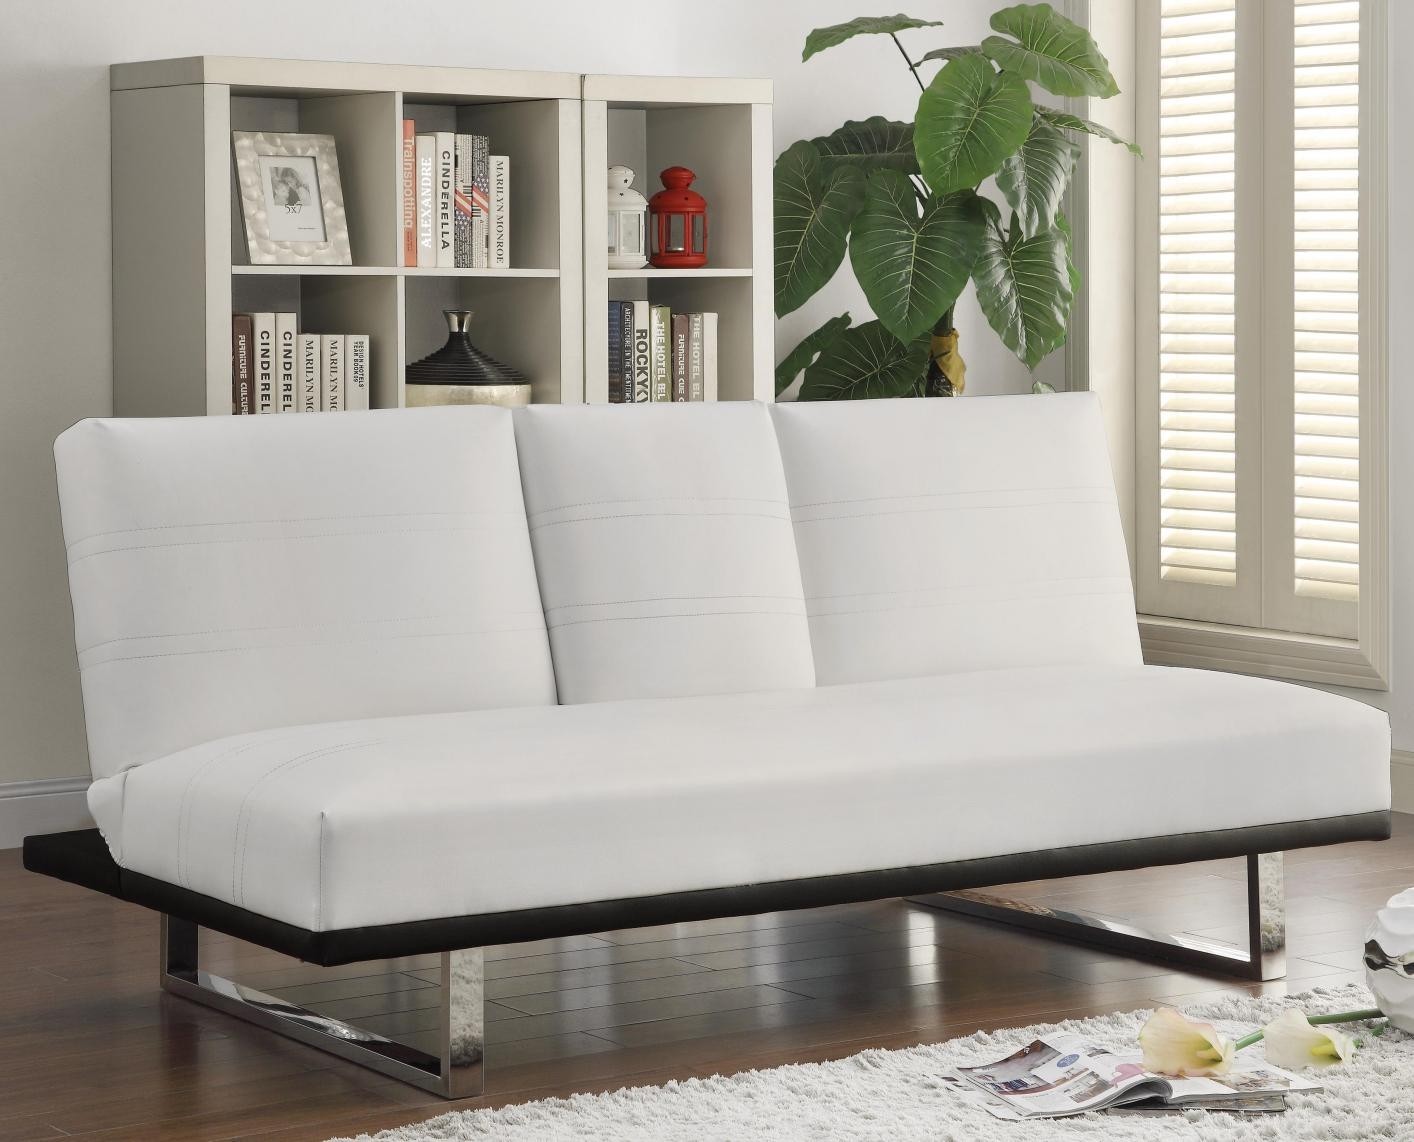 White leather futon steal a sofa furniture outlet los